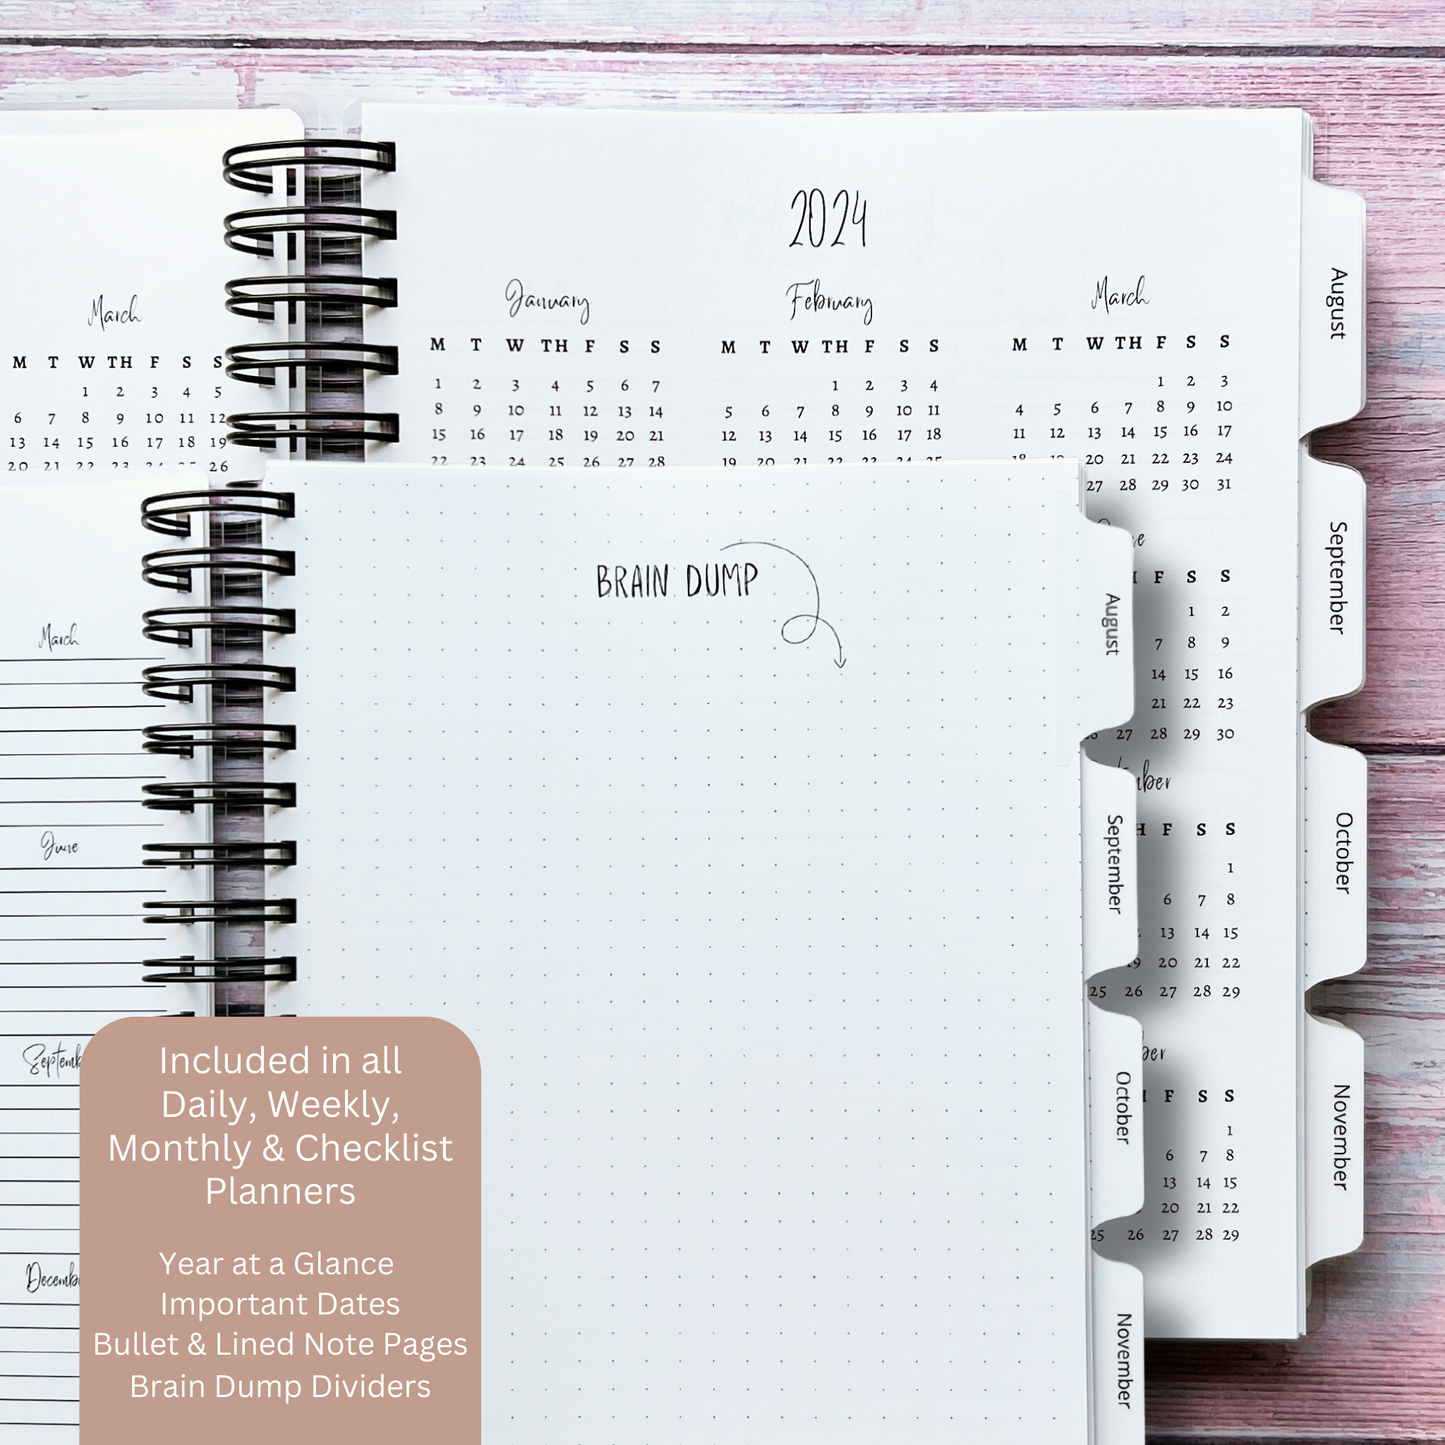 Personalized Moon Crystals Planner